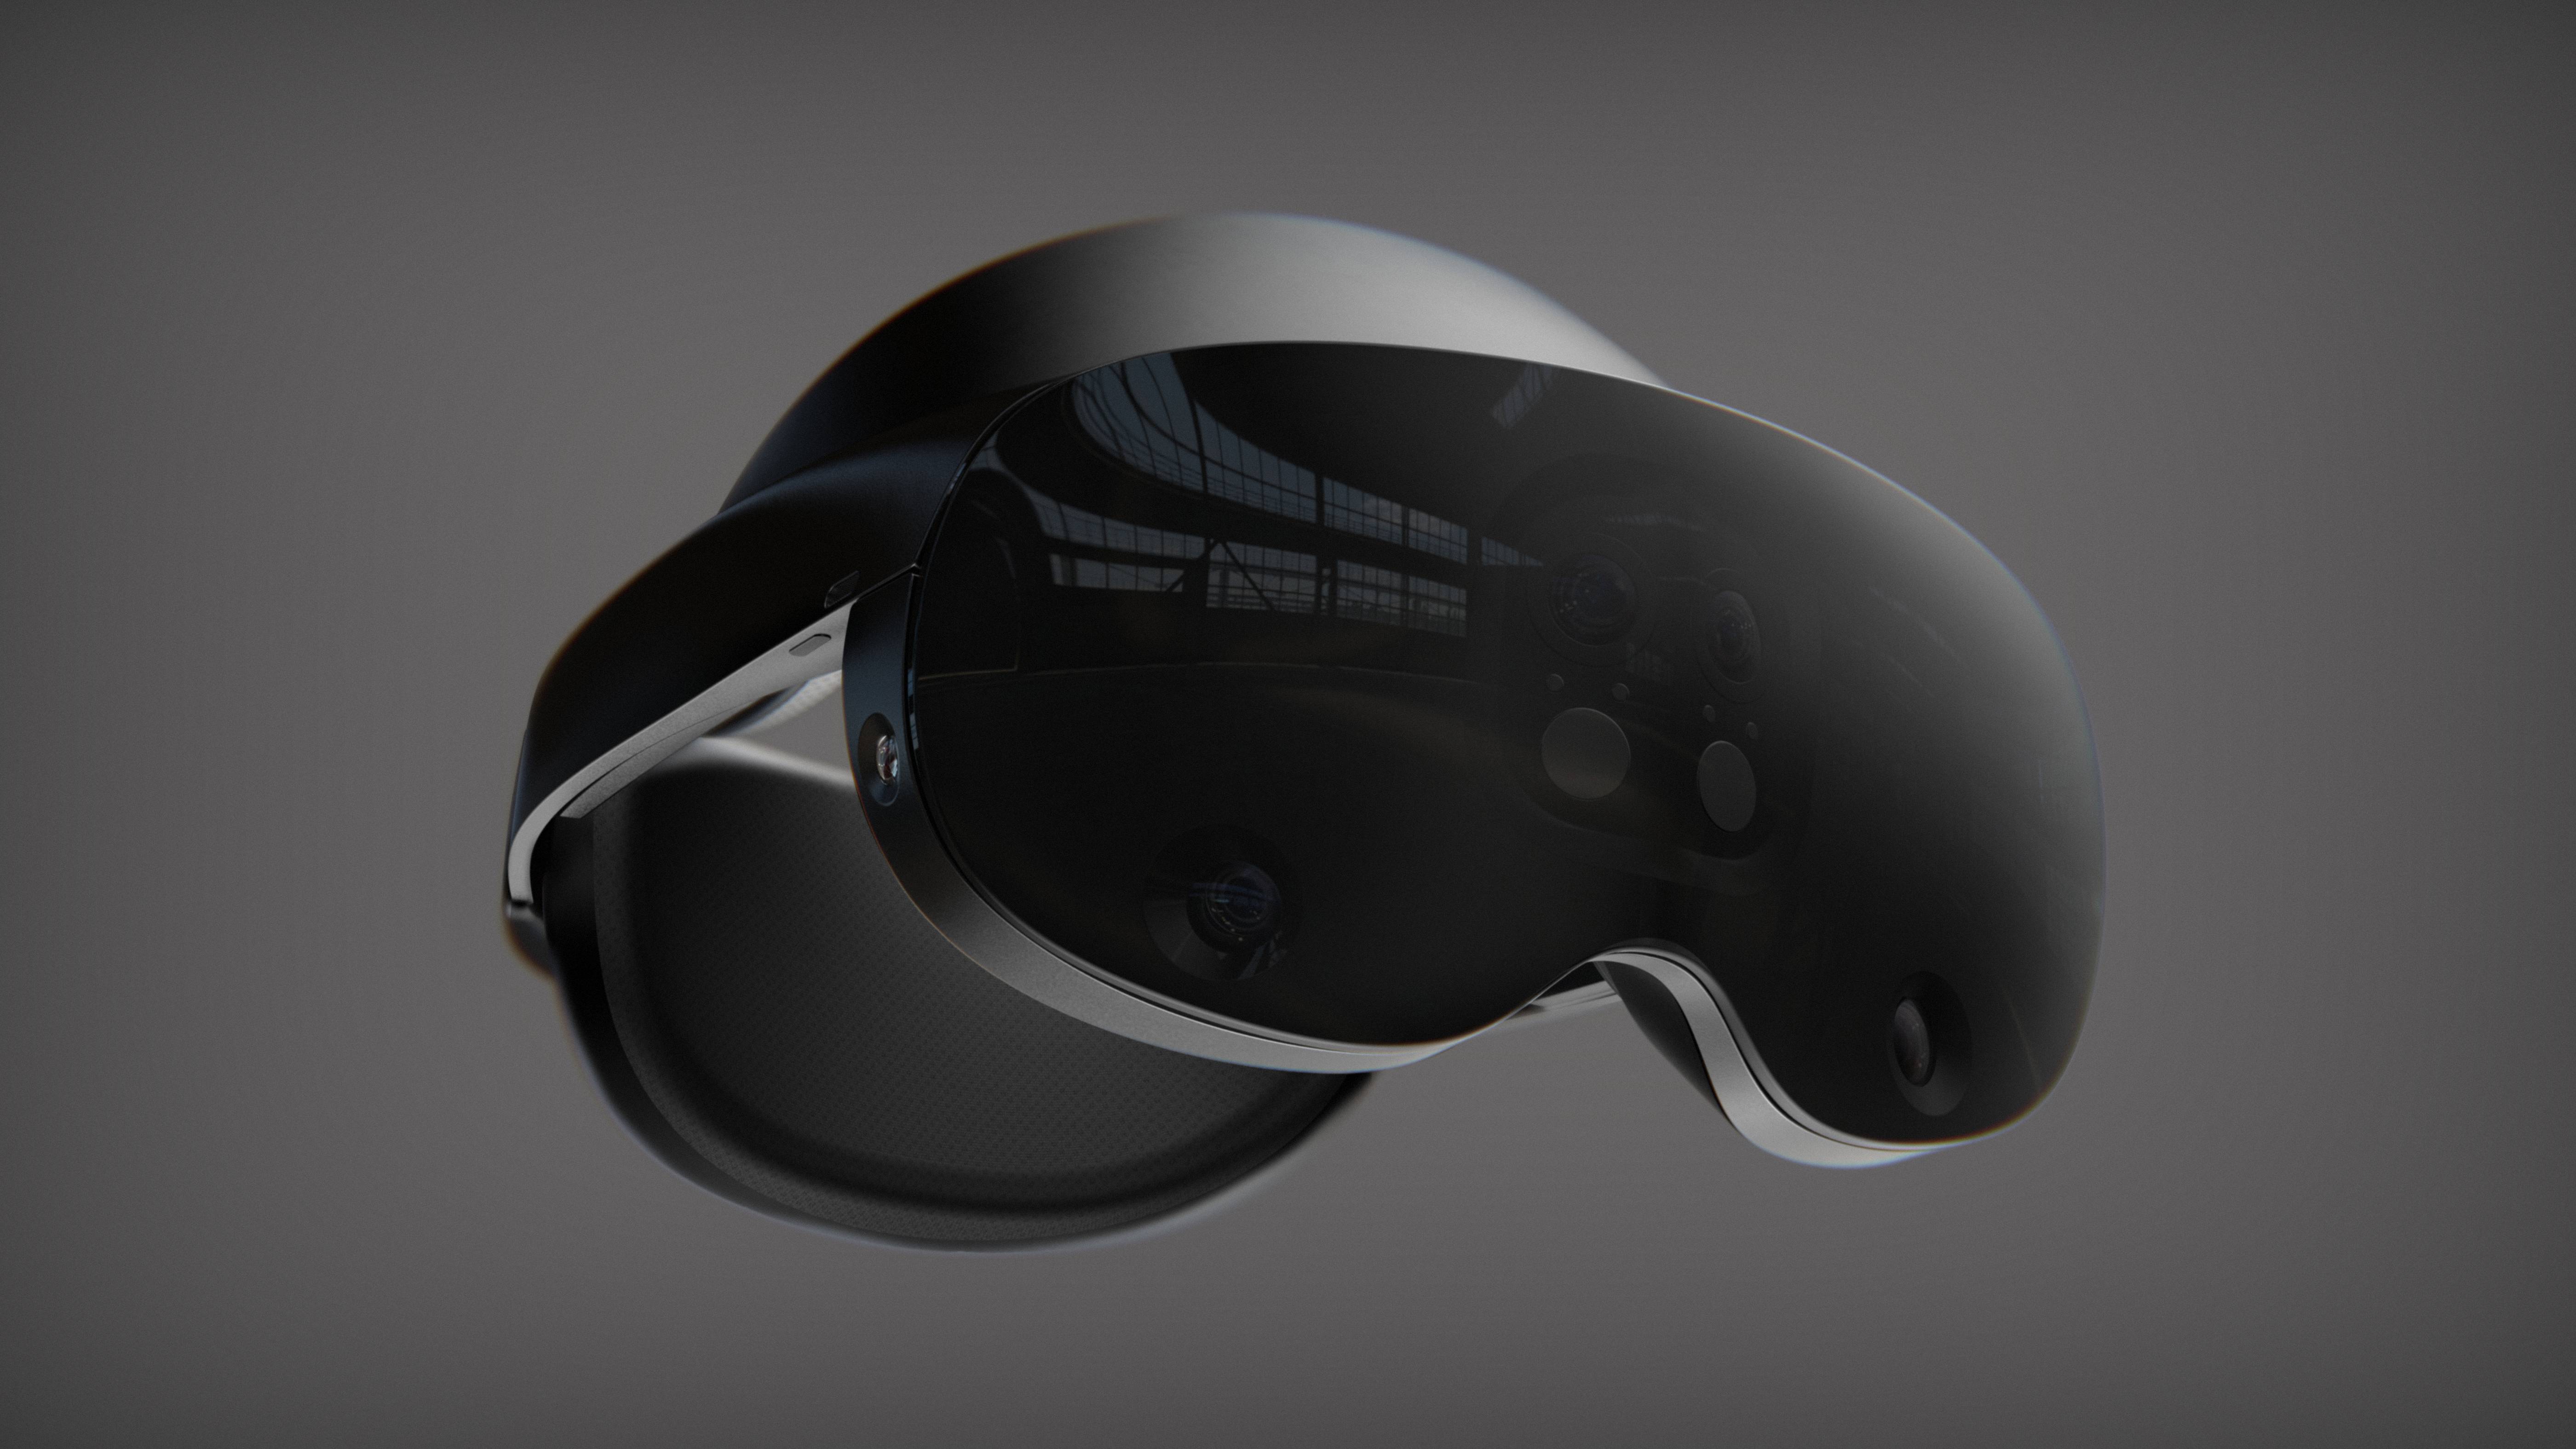 Quest Pro: Meta’s new VR headset coming in October, Quest 2 success “in the ballpark” of Xbox and Playstation